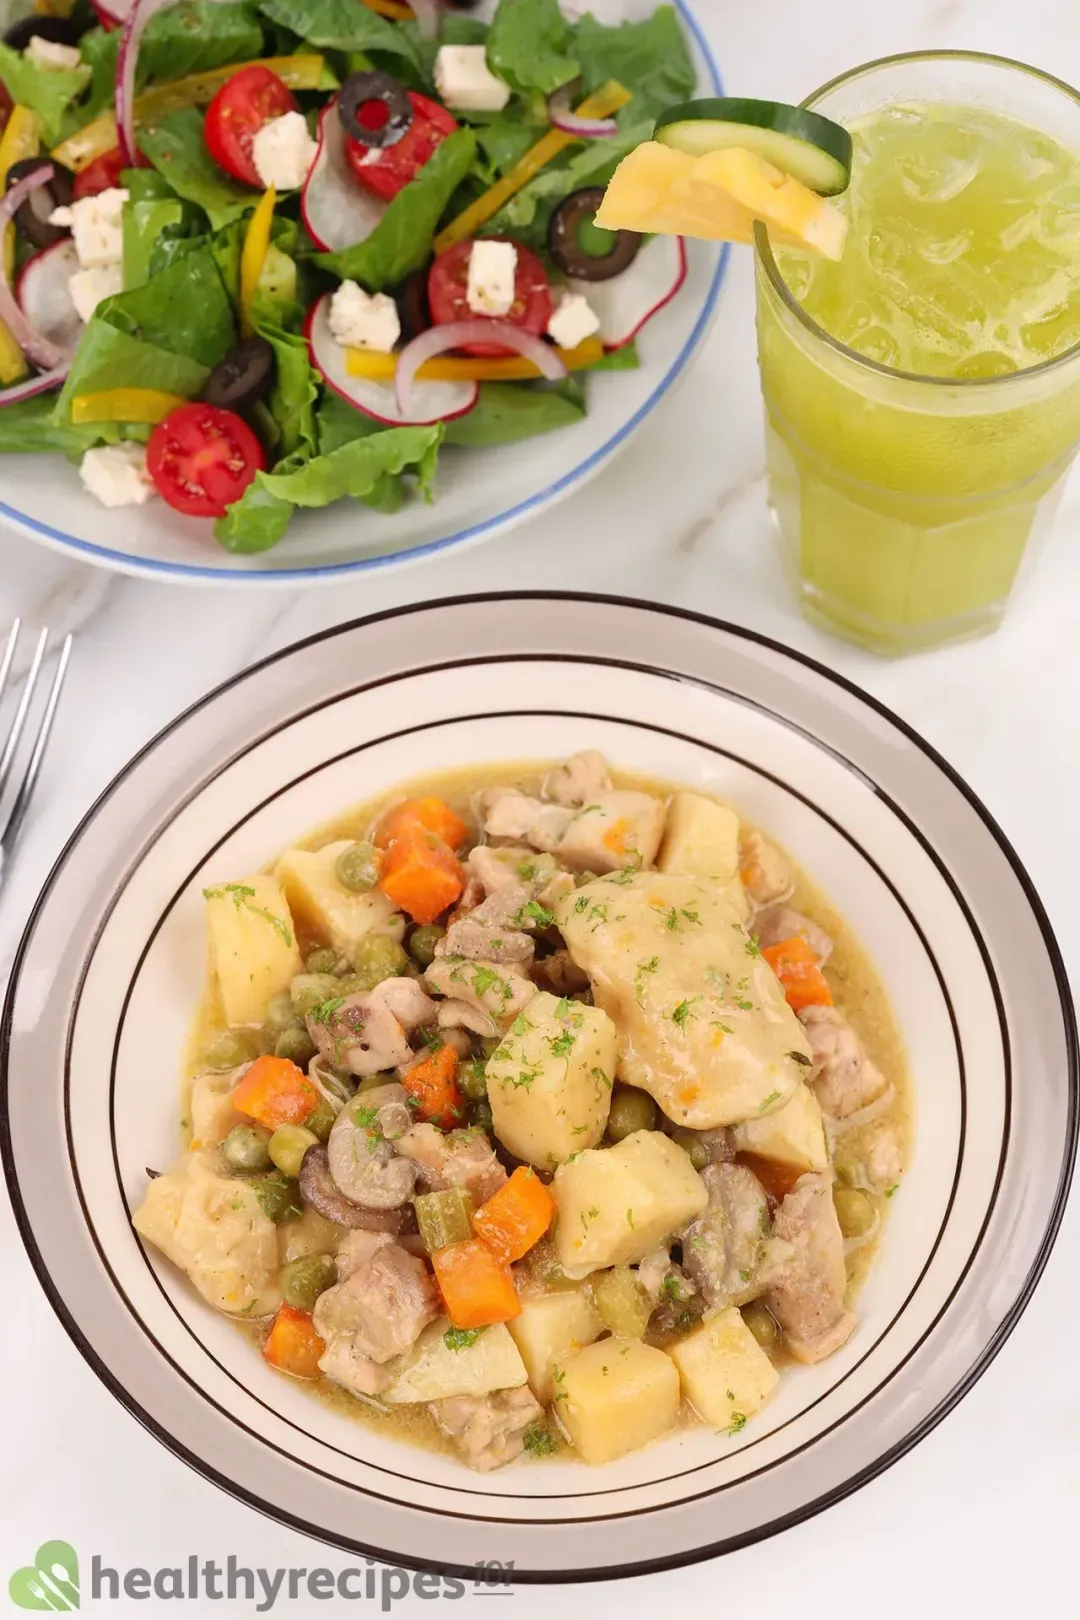 What to Eat With Chicken and Dumplings